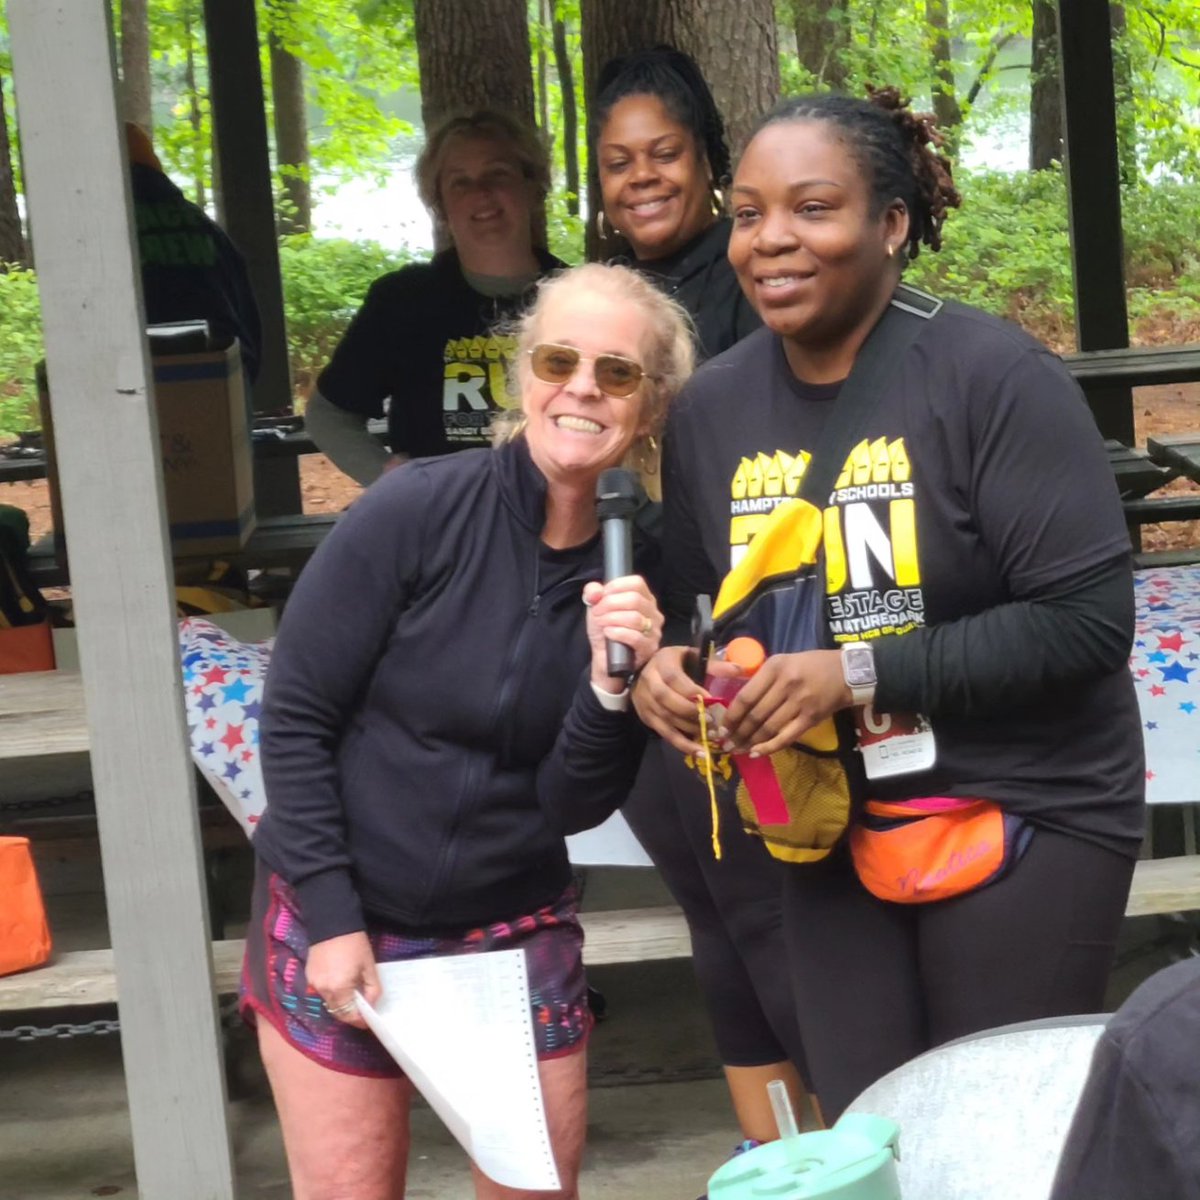 Today, Mrs. Orsborne, Ms. Brinkley and Ms. Parker participated in the HCS Run for the Stage 5K. This race raises money to provide scholarships to HCS graduates. Congratulations to Ms. Parker, who won 2nd place in her age category!!🎉🎉 #HCSRunforthestage #HamptonCitySchools